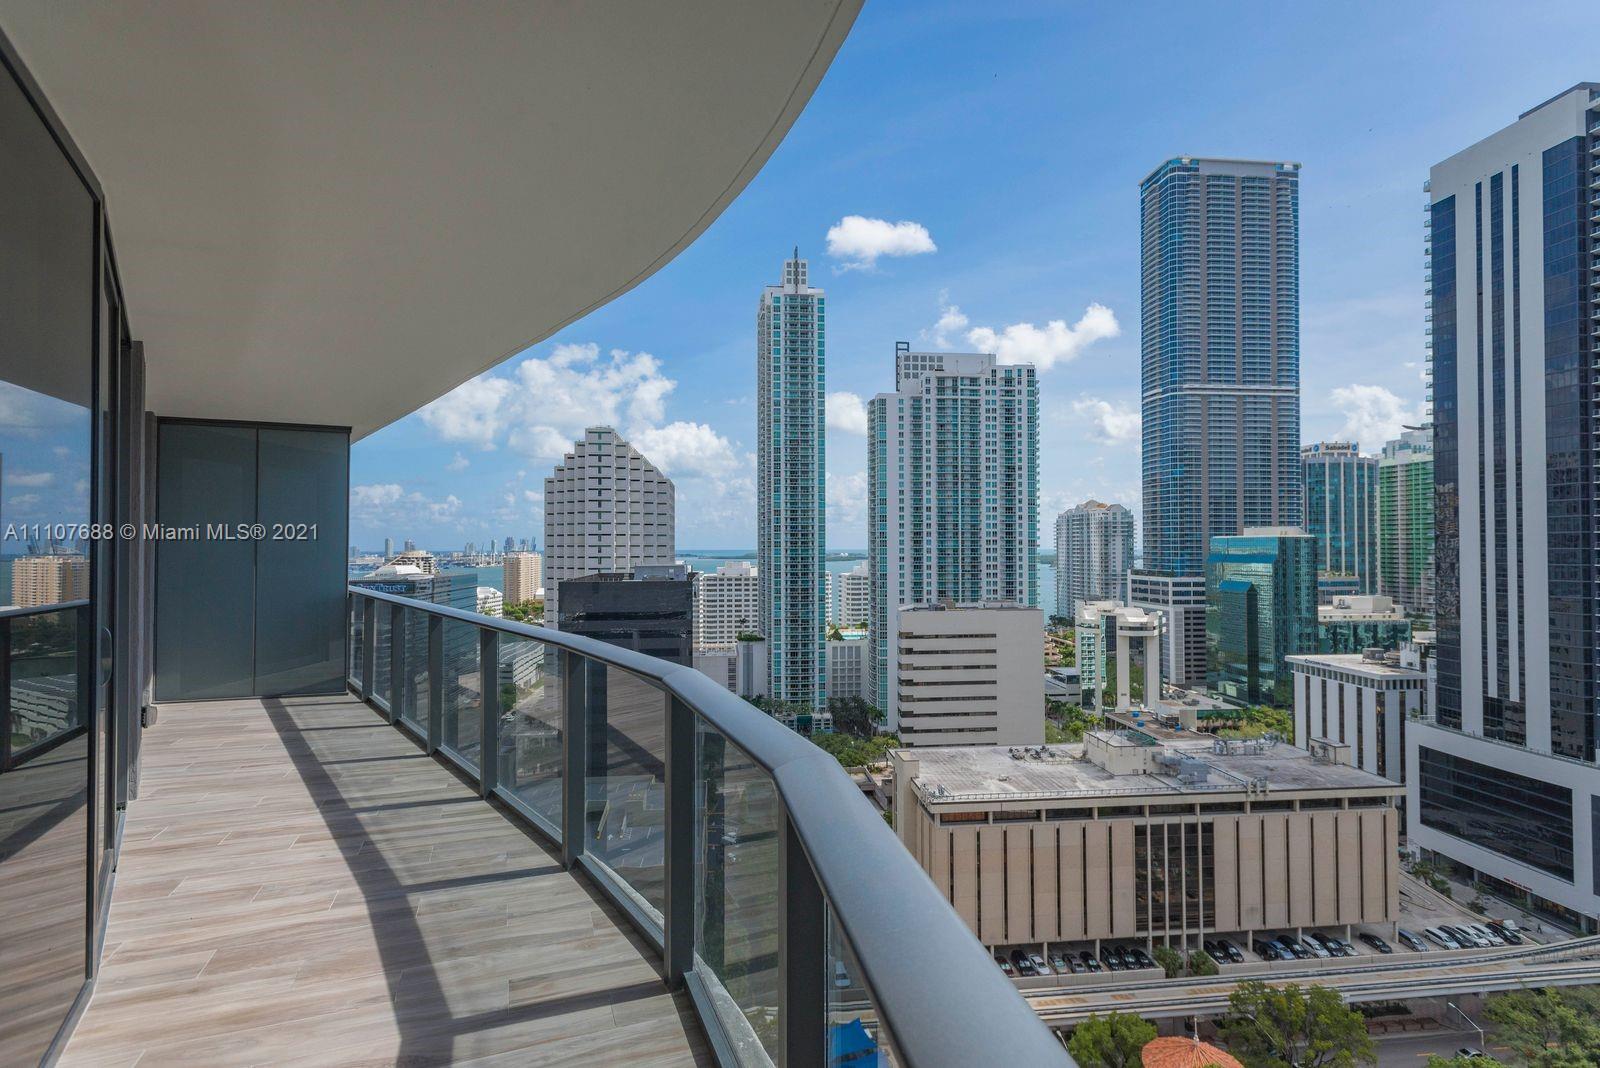 Brand new SLS LUX Condo in Brickell. Best price for 3 Bedrooms + Den/ 4 Bath with 2 Parking Spaces. 5 starresidential finished: private elevator, Ital Kraft kitchen Cabinetry, porcelain floors, build out master closet. Top ofthe class amenities including Equinox Gym, 9th floor pool with restaurant services, 57th floor pool, tennis court,kids play room, 5 bars and celebrity chef Katsuya Restaurant. 24 hour concierge service , spa, tennis courts andmore... The unit is rented until Dec 29, 2021.

Domestic and Foreign National Financing Available